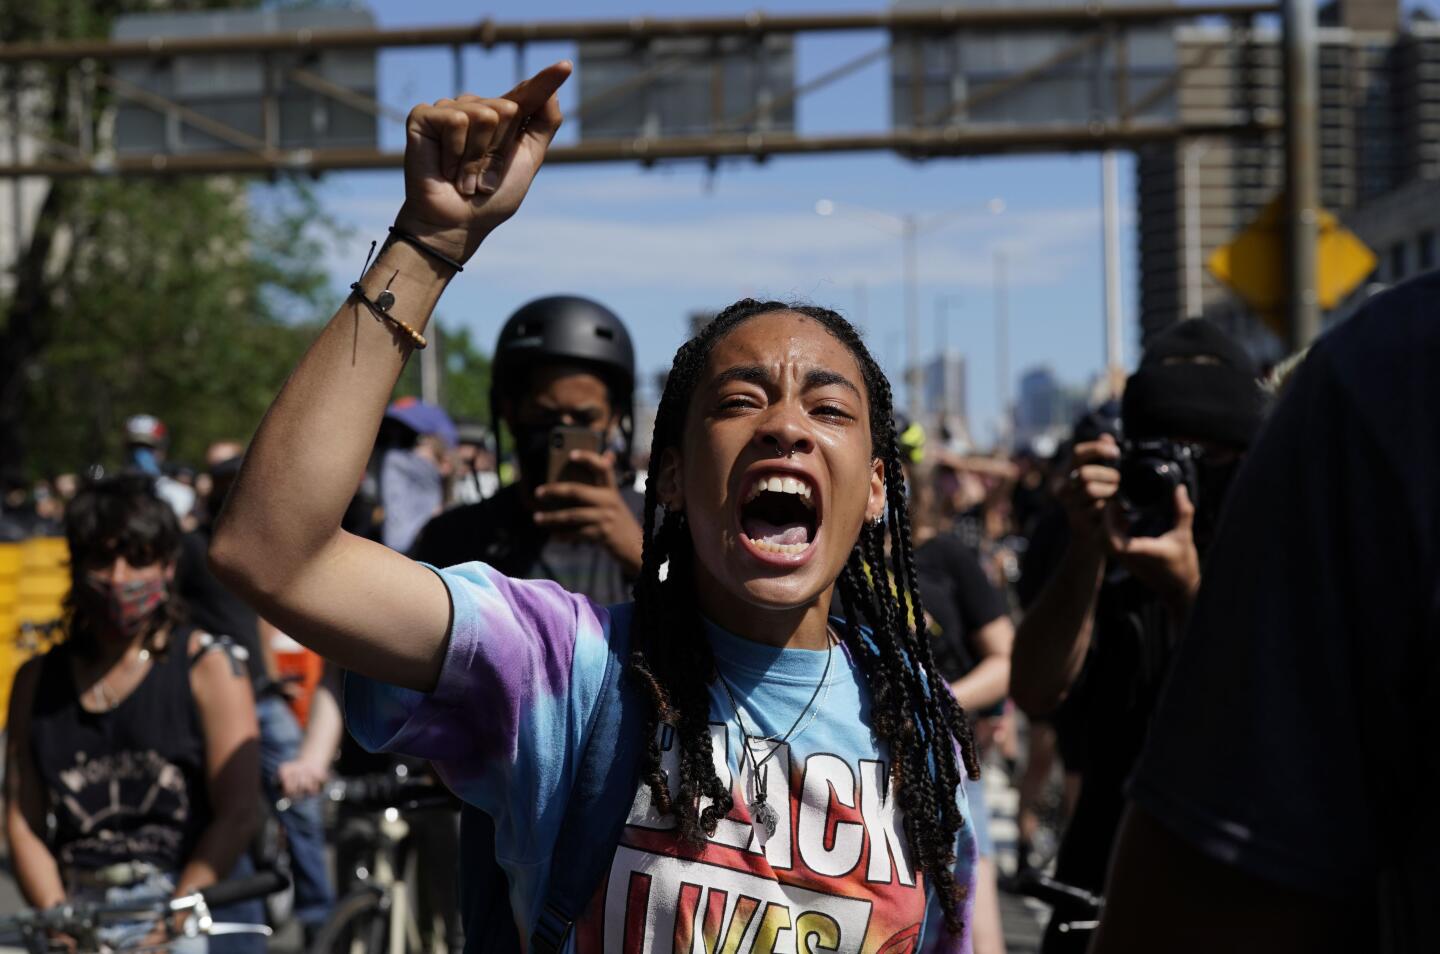 A young protester raises her fist as she crosses the Brooklyn Bridge during a Juneteenth rally in New York.